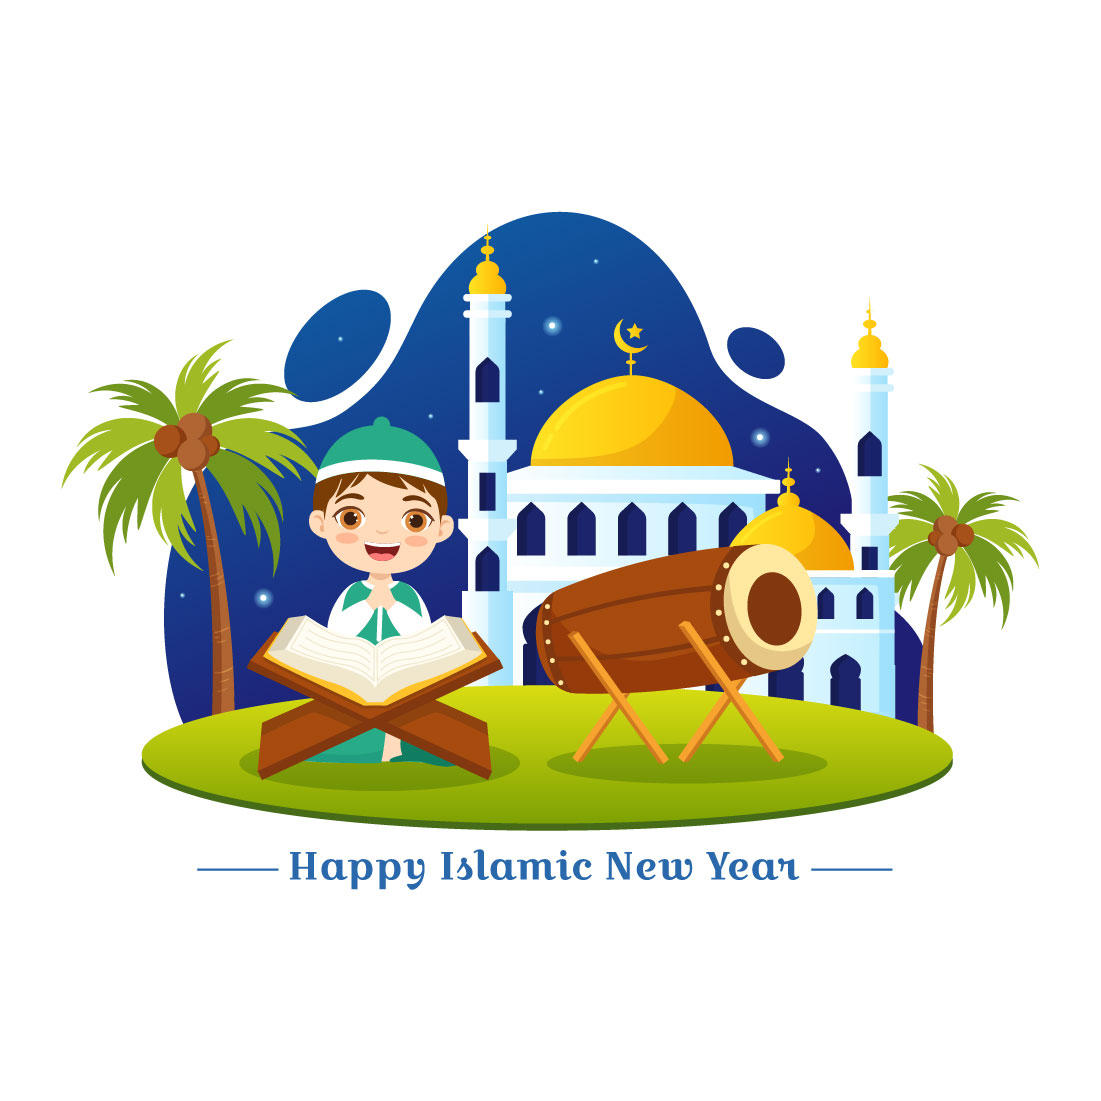 21 Happy Islamic New Year Illustration preview image.